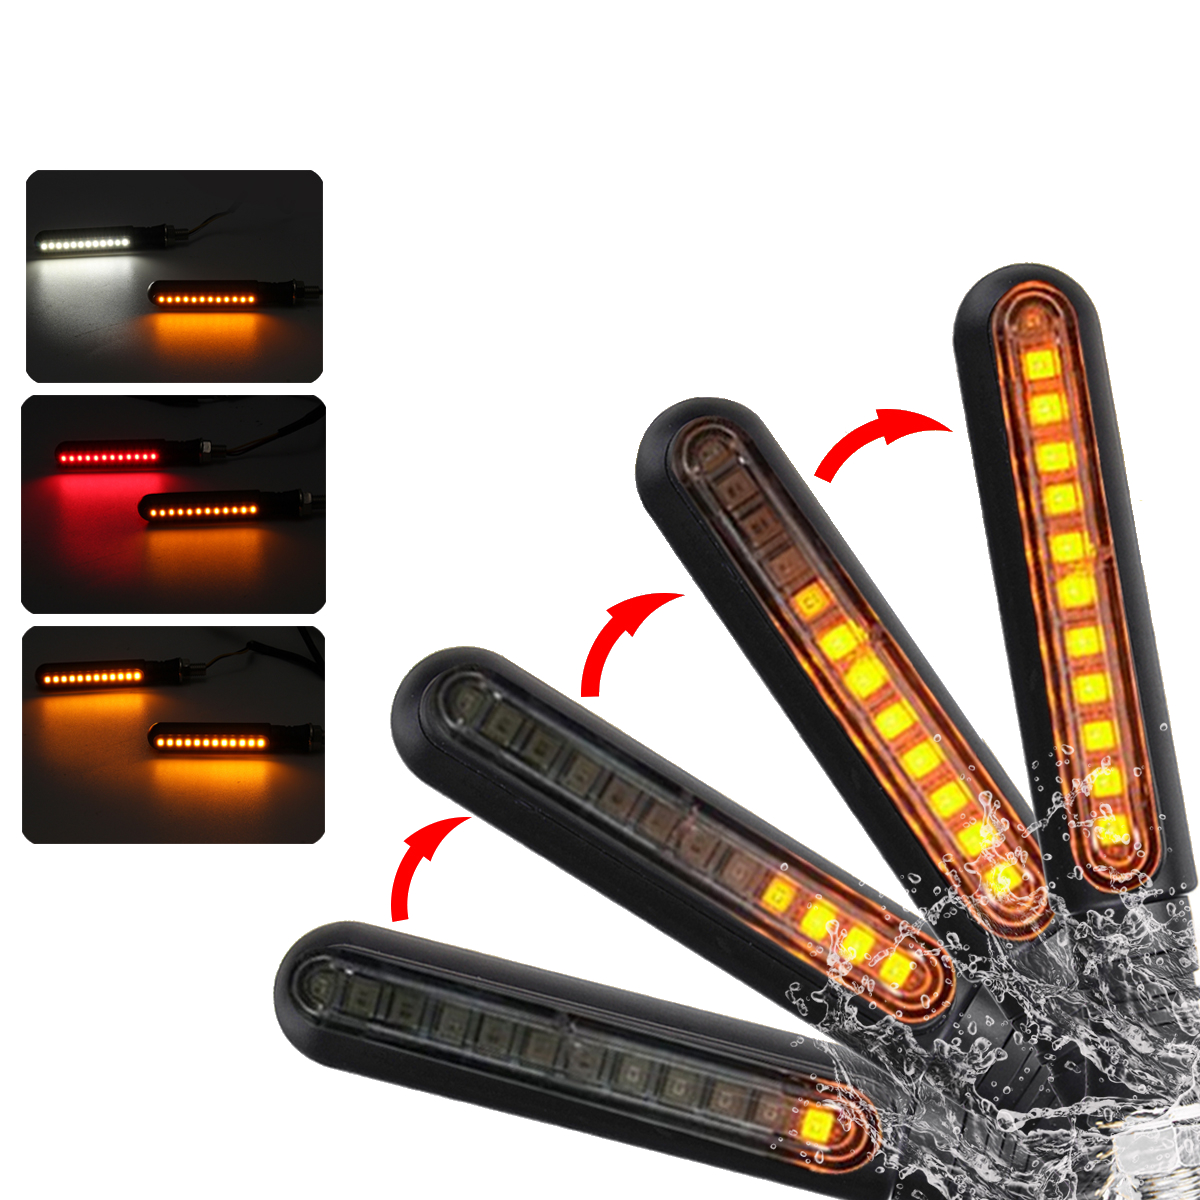 

12V Pair Motorcycle 24 LED Turn Signal Flowing Lights Indicator with White DRL/Red Brake Lamp